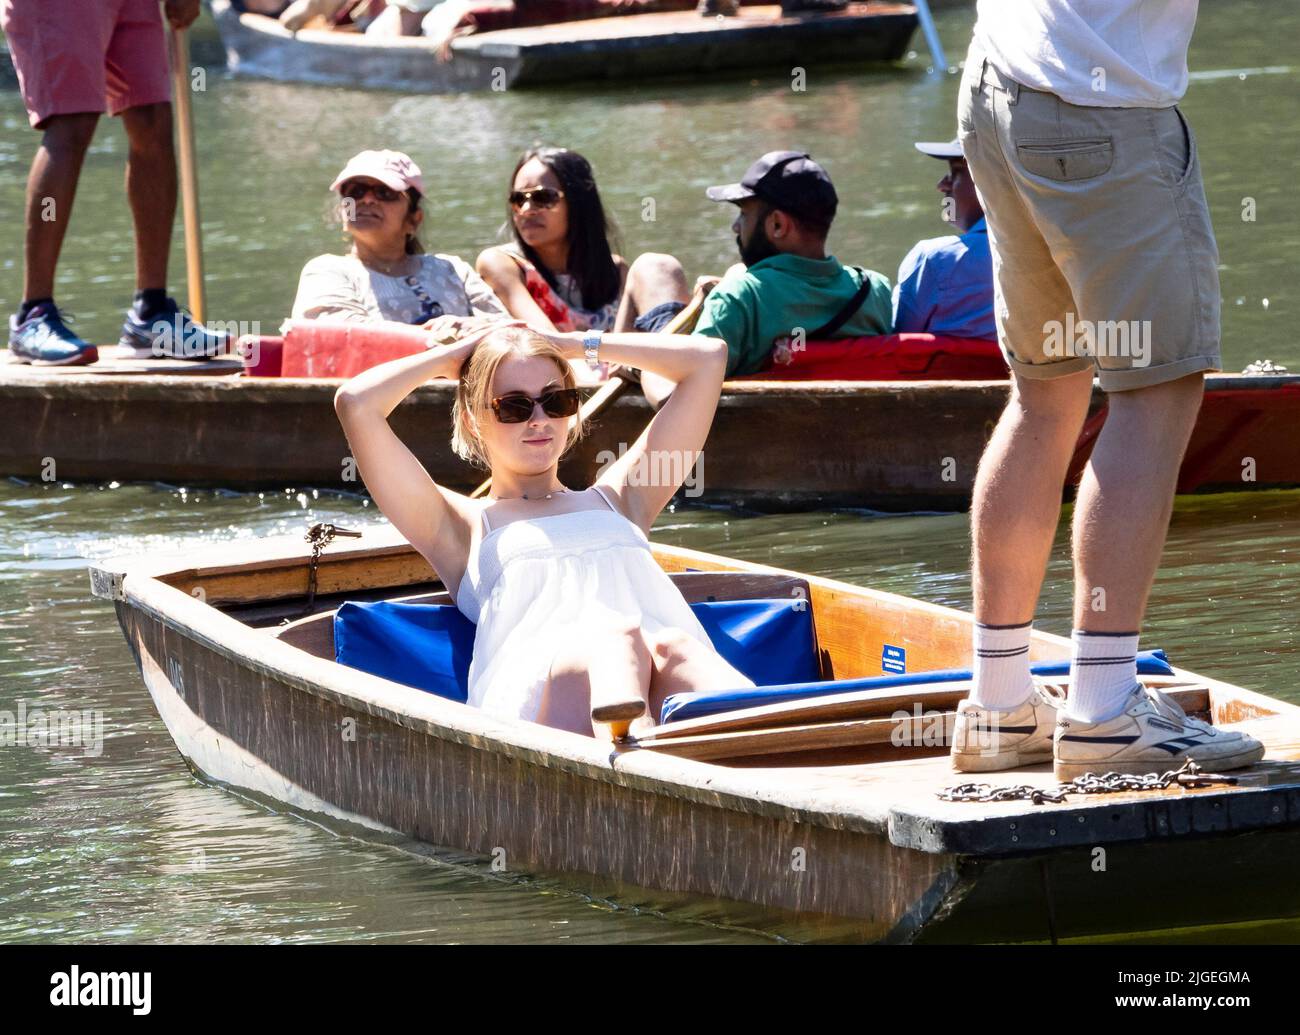 Cambridge, UK 10th July 2022. Tourists enjoy the hot Sunday weather punting on the River Cam in Cambridge. Credit: Headlinephoto/Alamy Live News. Stock Photo